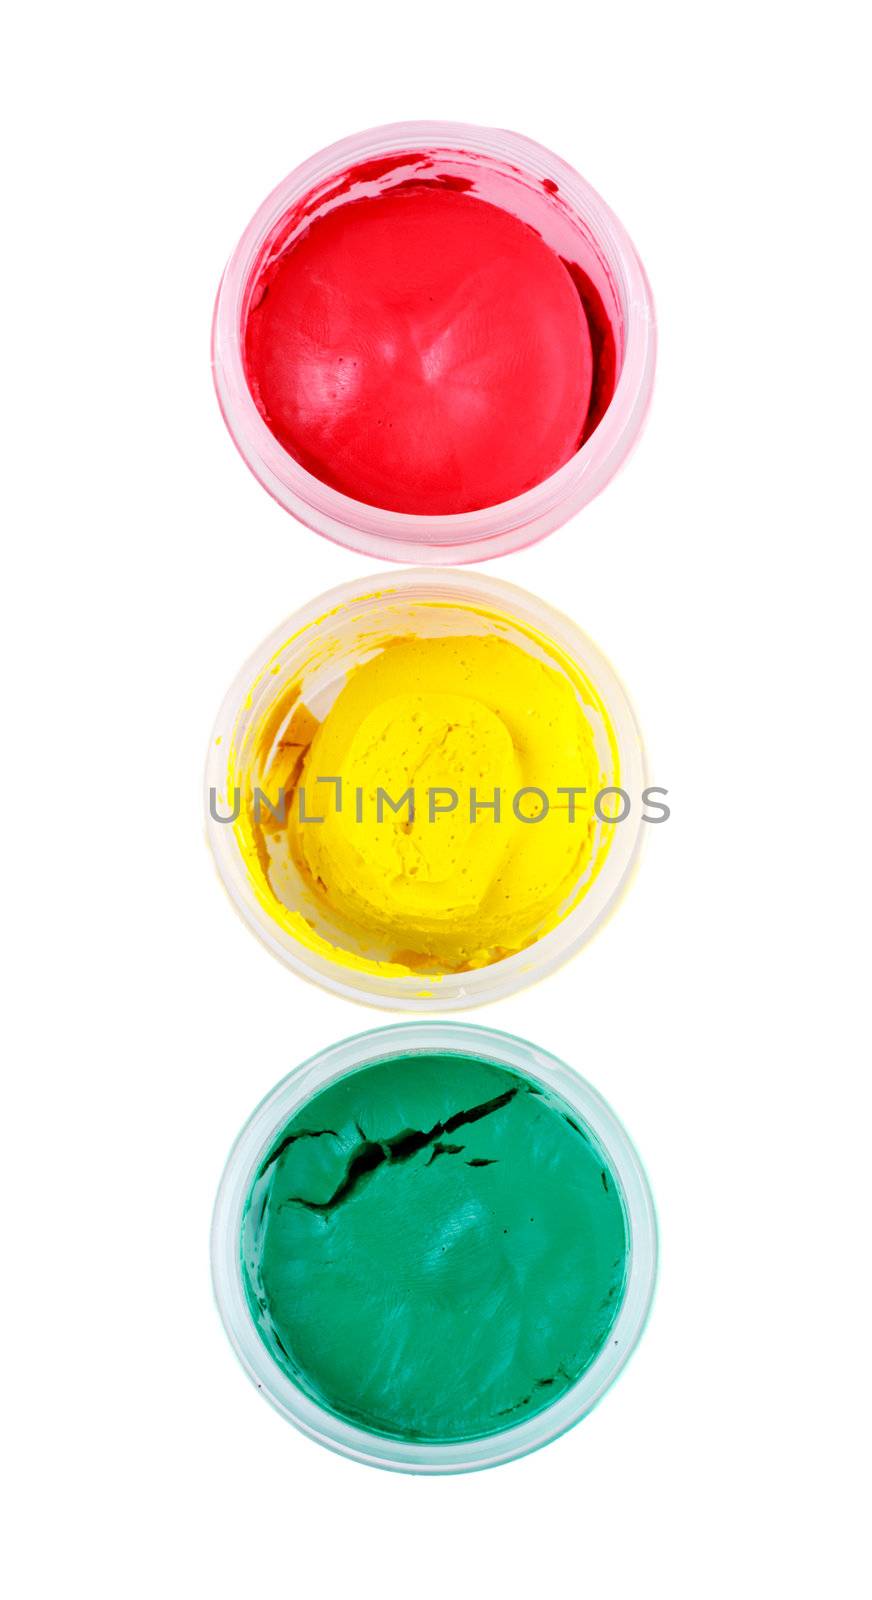 three paint cans like traffic light isolated on white